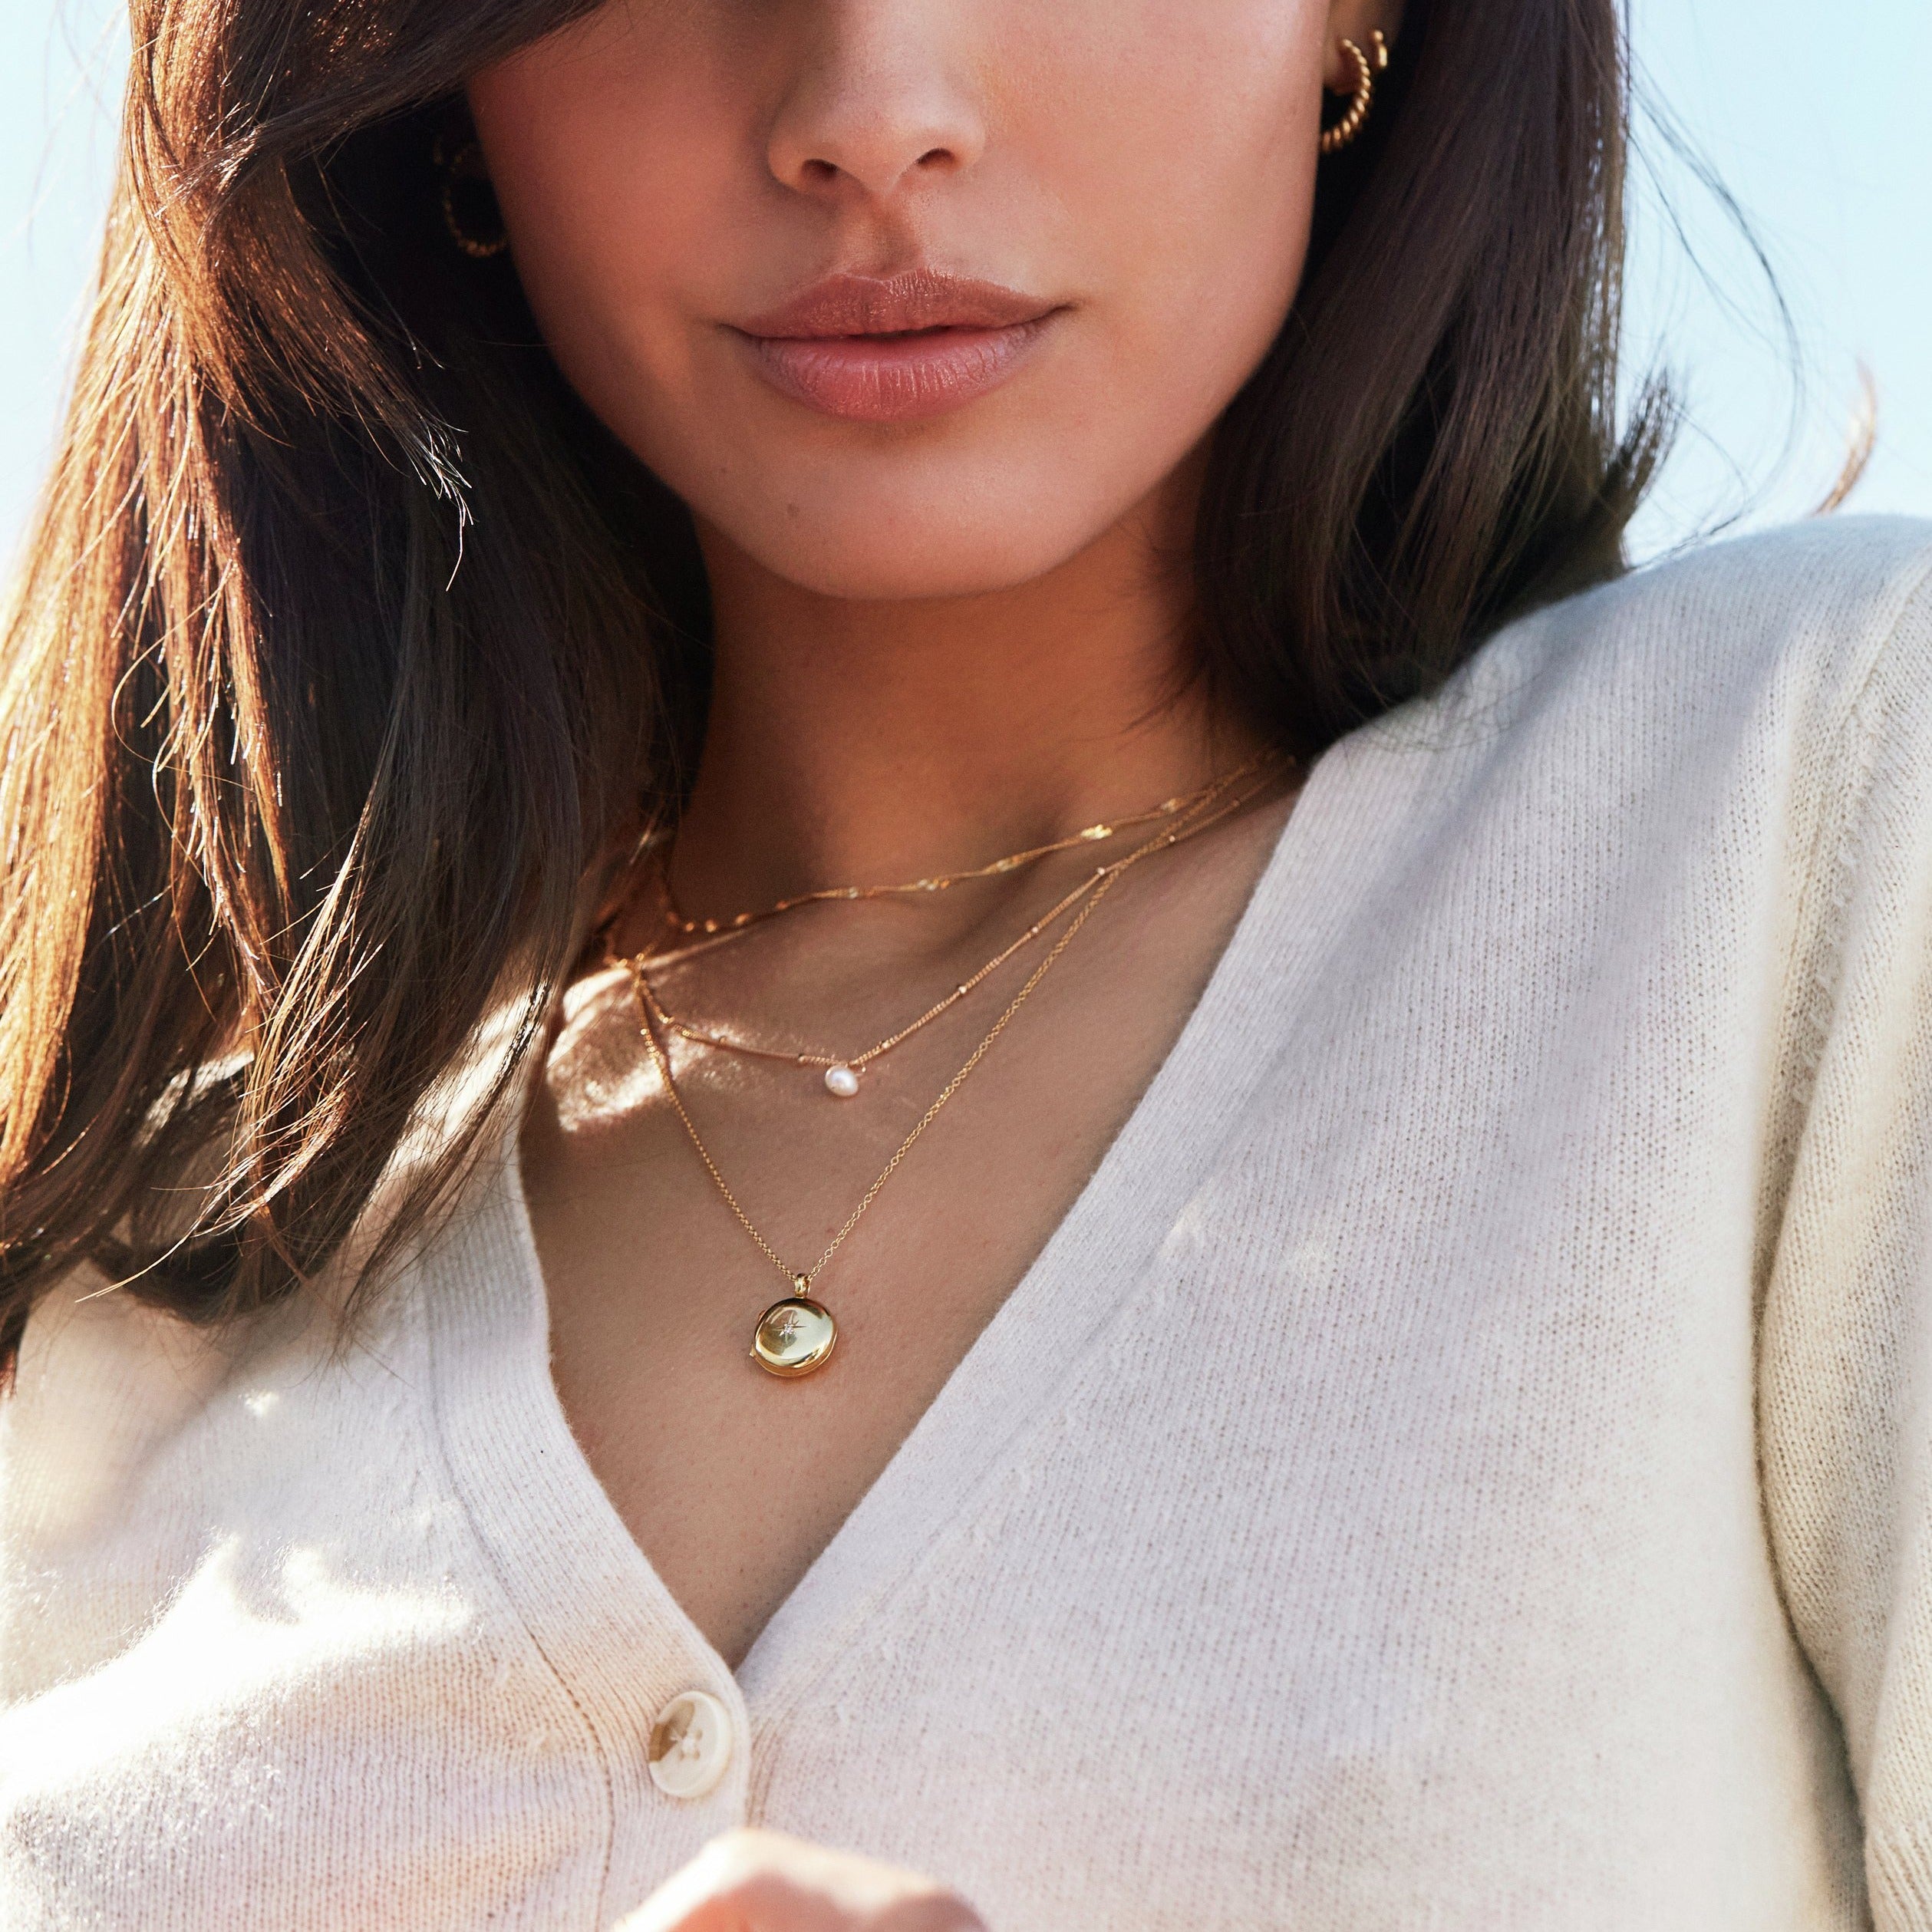 A woman wearing a gold small round diamond locket necklace, a gold twisted rope chain necklace and a gold single pearl satellite necklace around her neck with a beige sweater and a gold large twisted rope hoop earring in her ear lobe